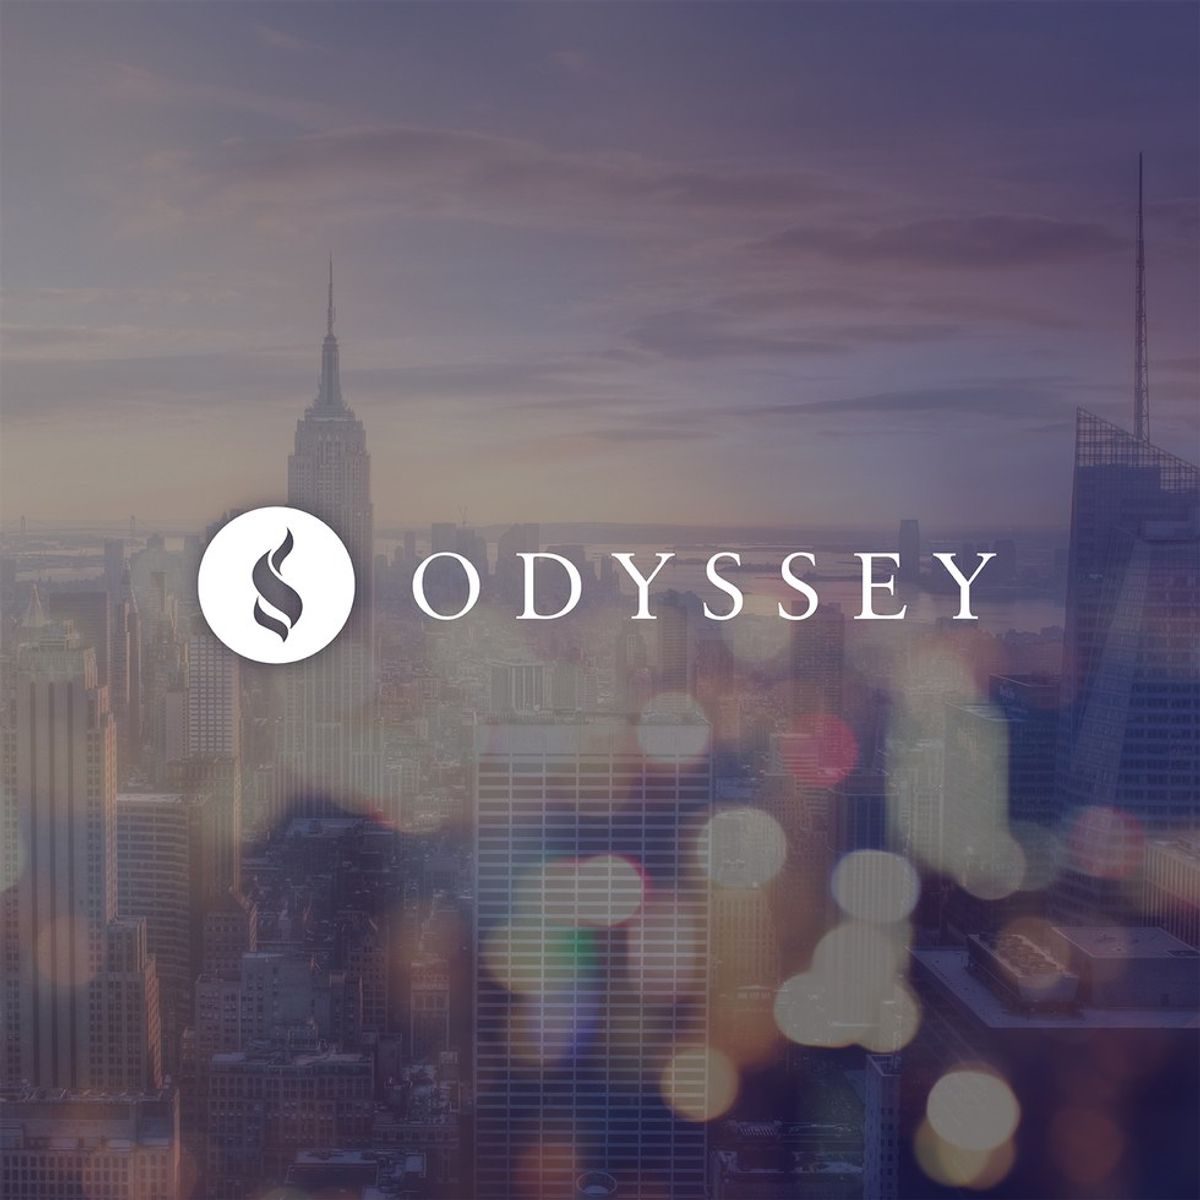 Why We Love The Odyssey!